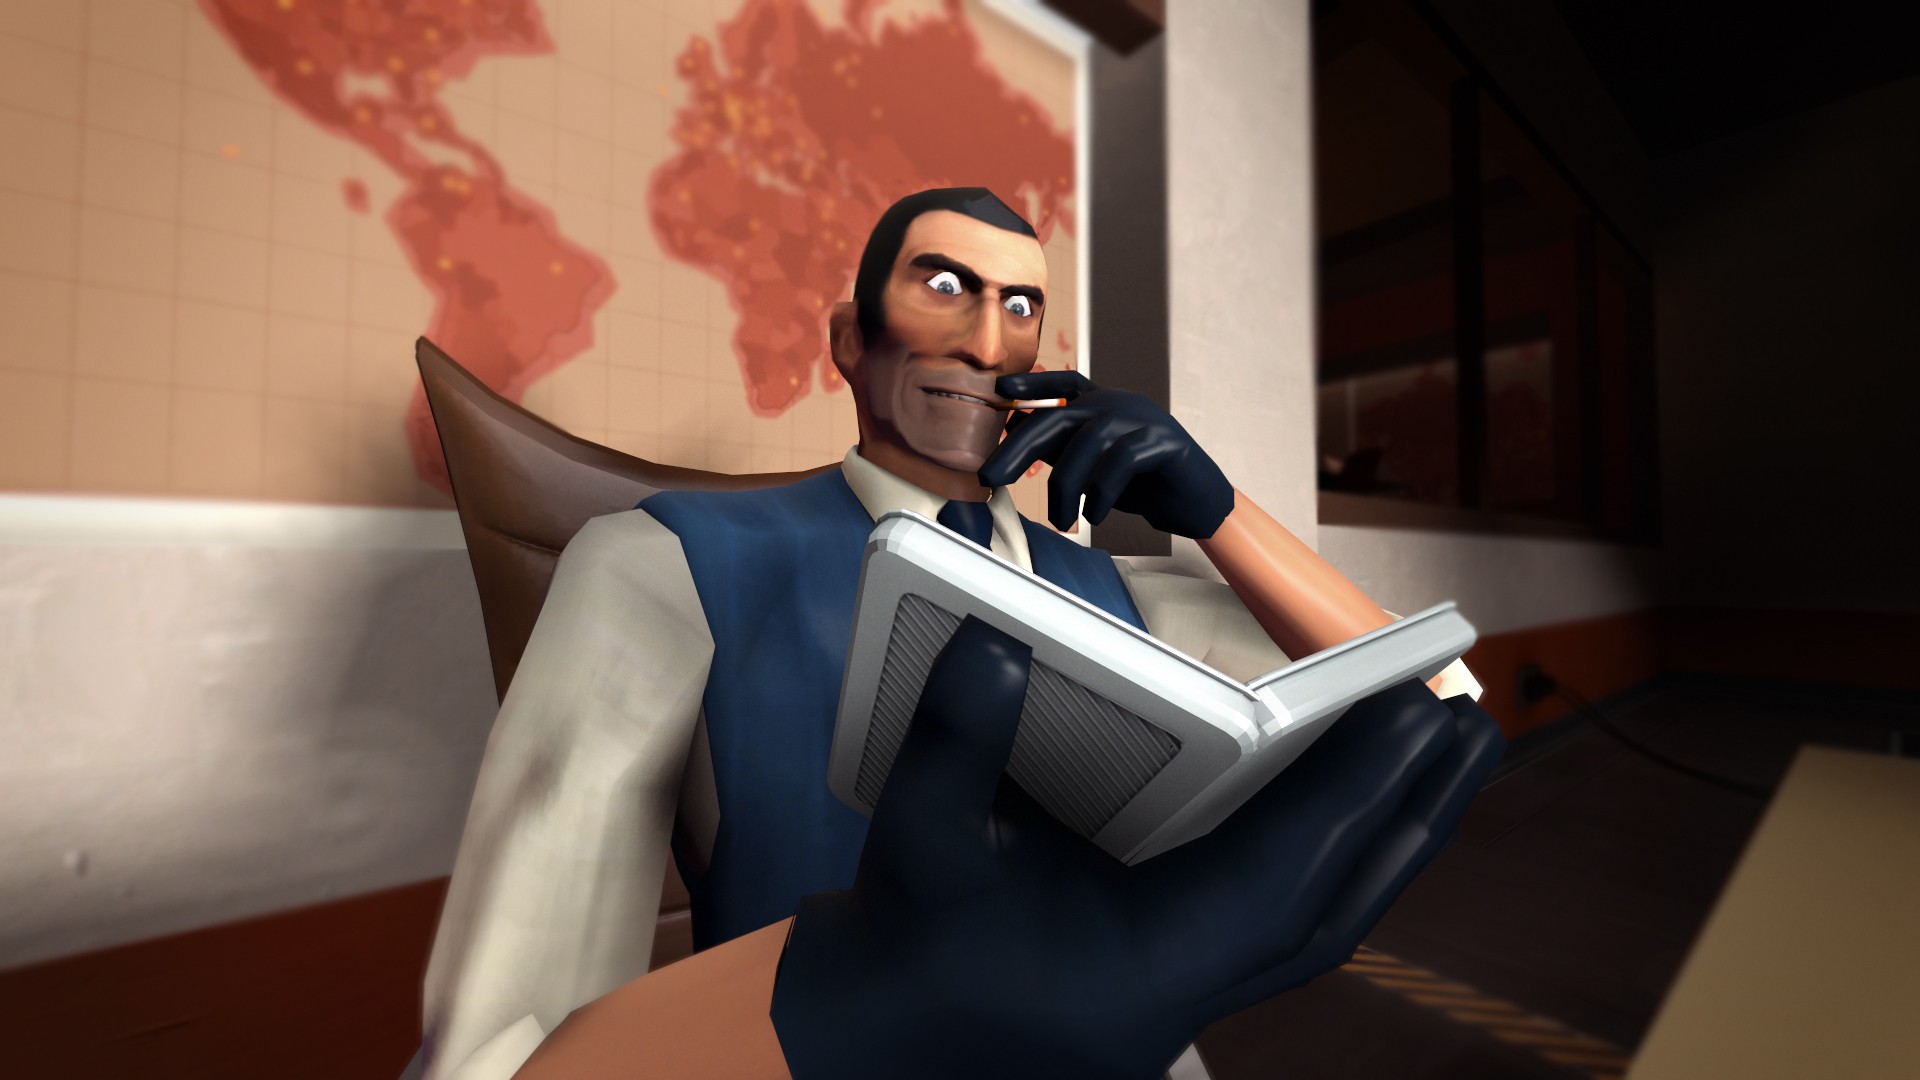 Team Fortress 2 wallpapers 